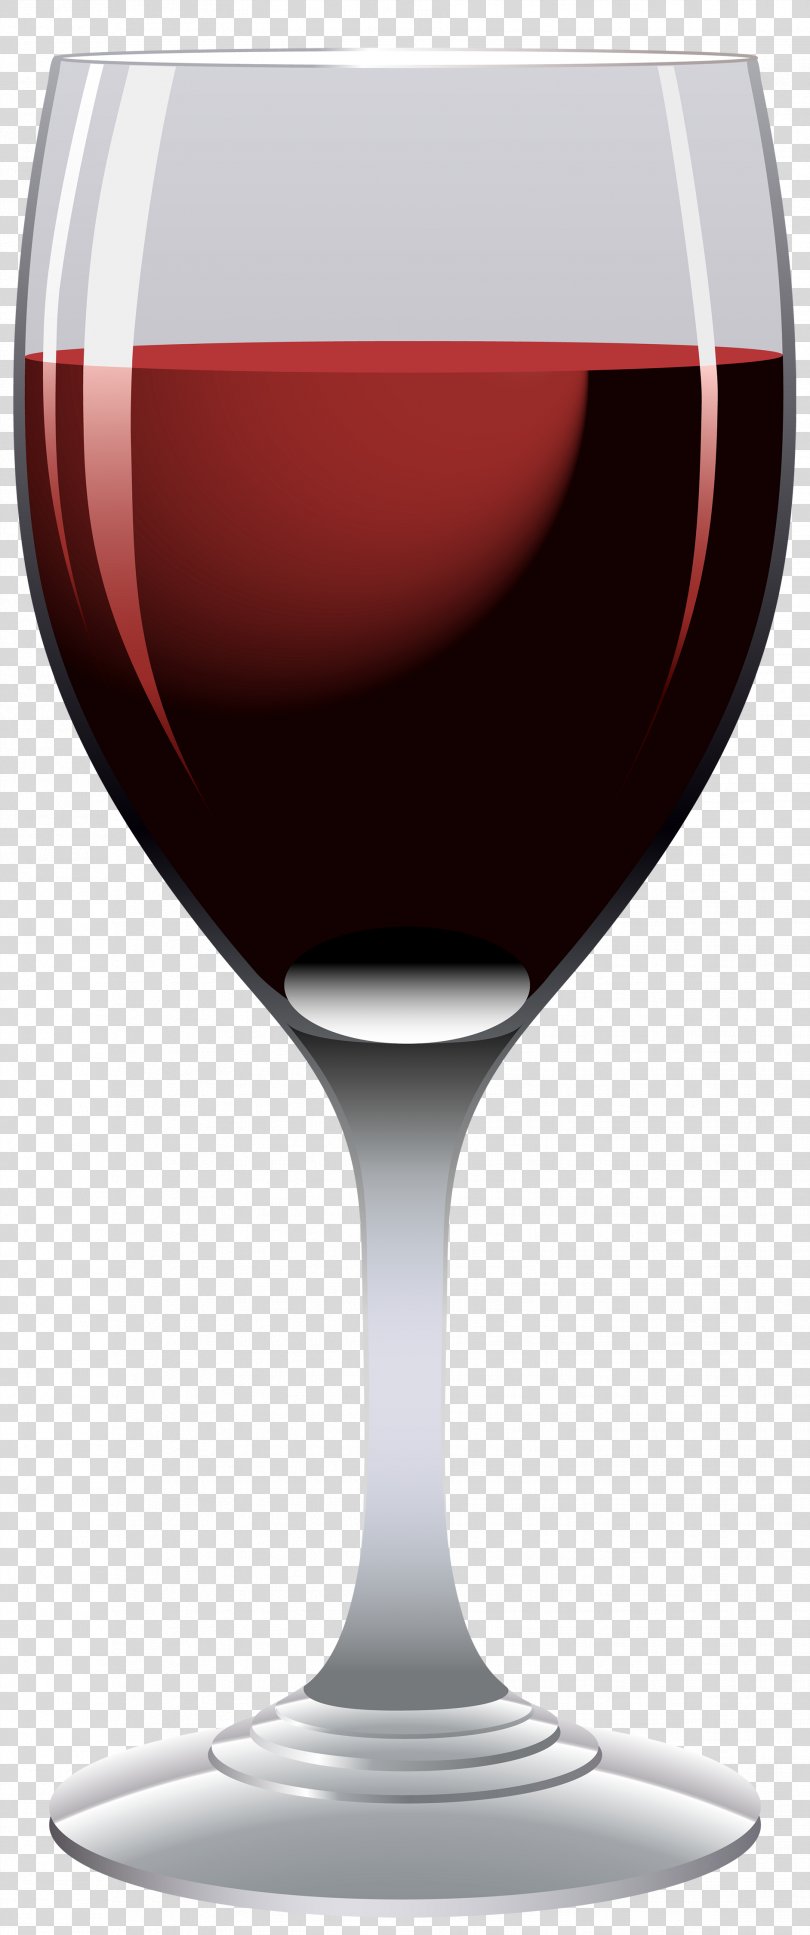 Red Wine Wine Glass Clip Art, Wine Goblet Cliparts PNG